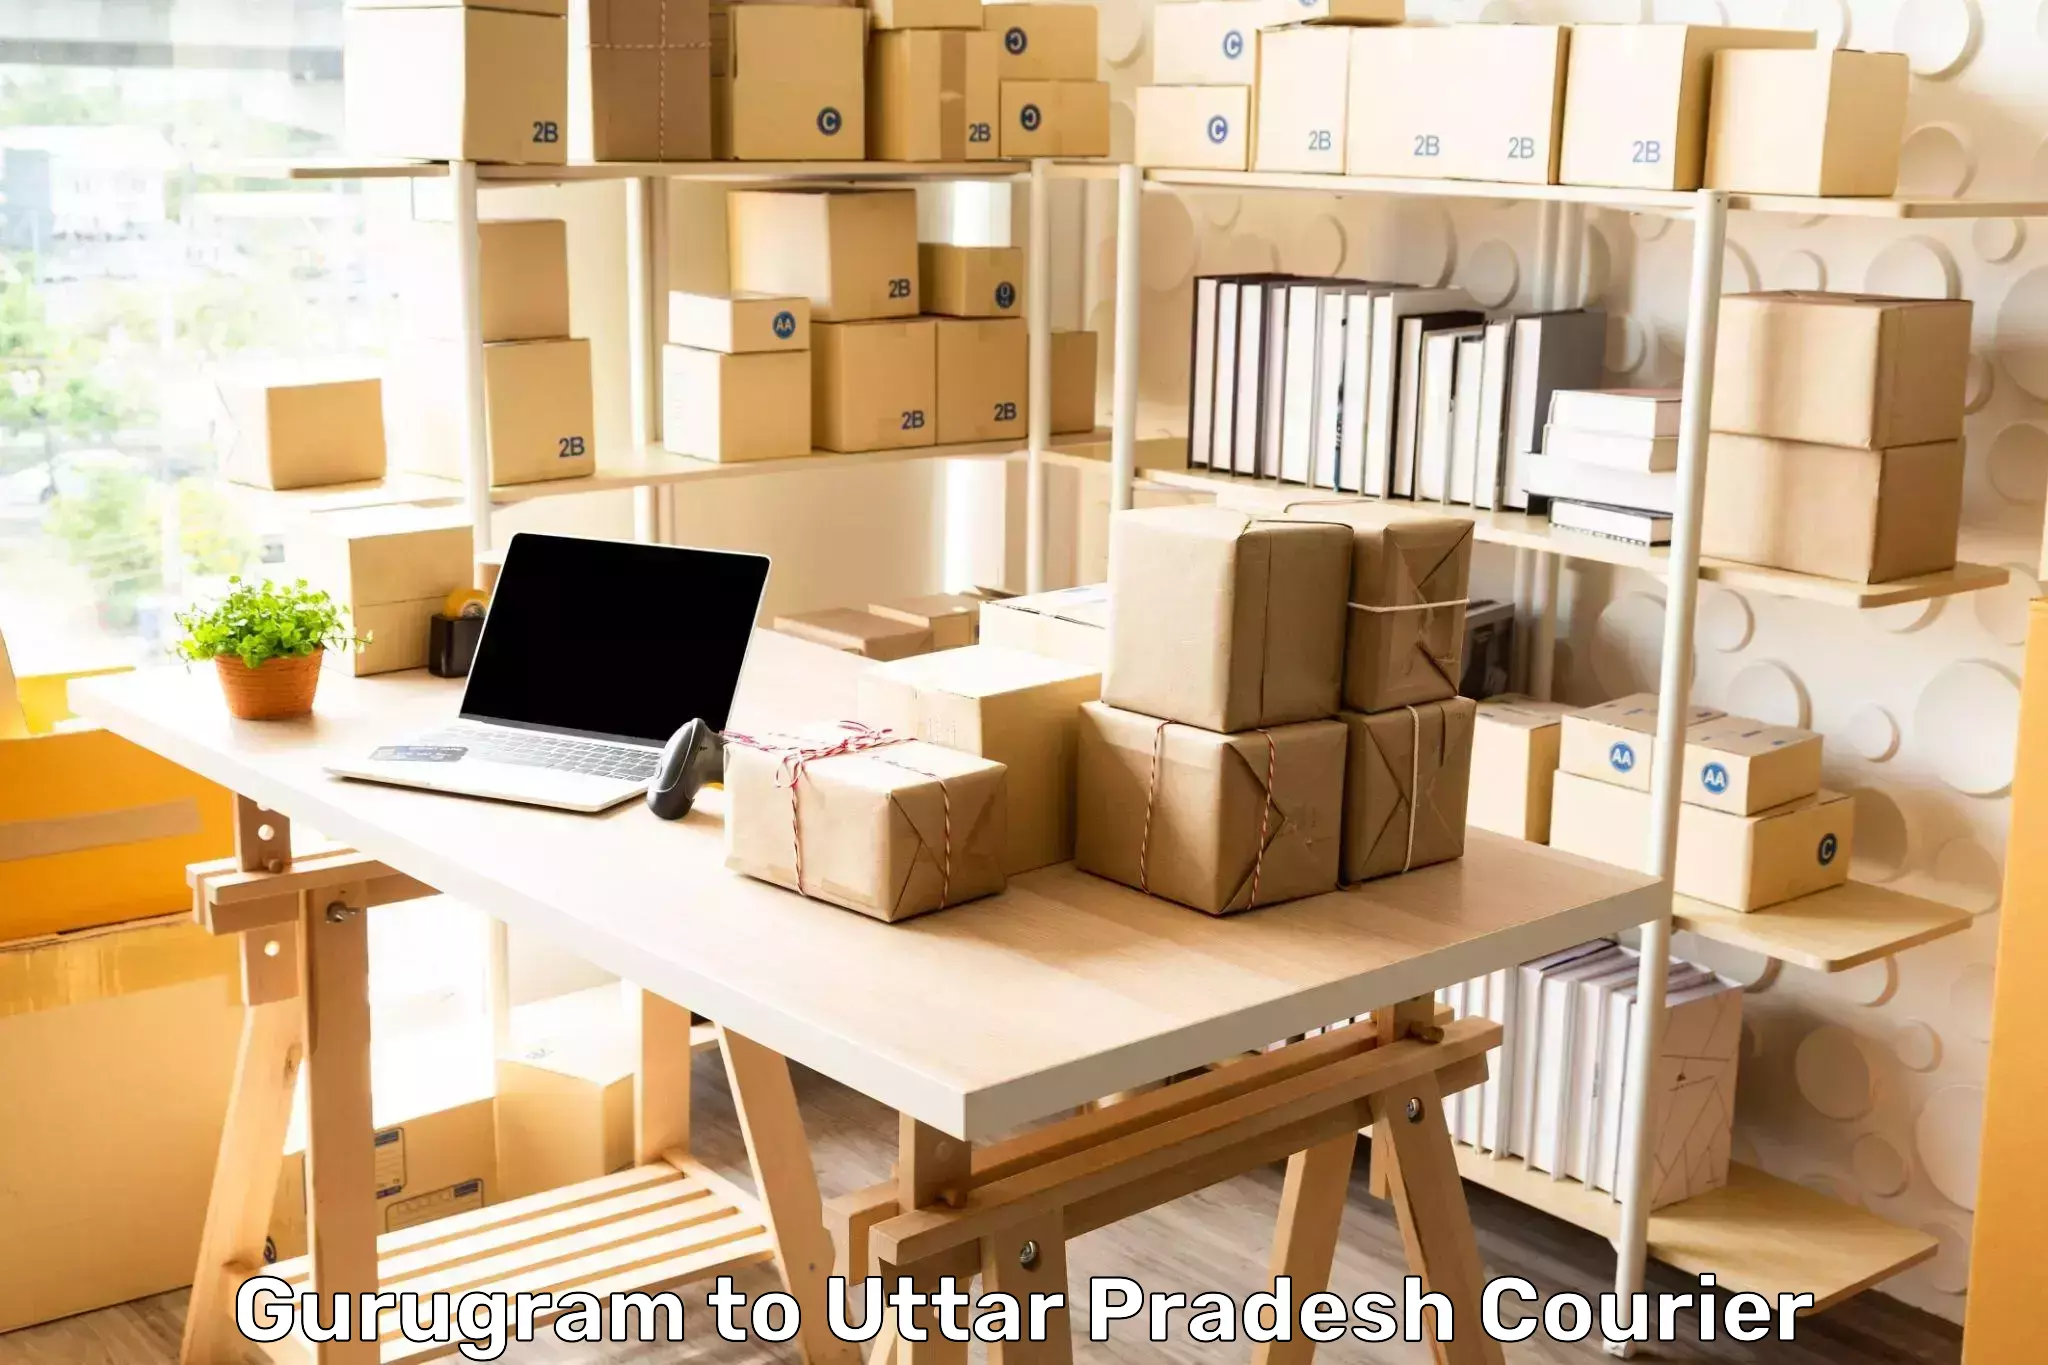 Cost-effective shipping solutions Gurugram to Tulsipur